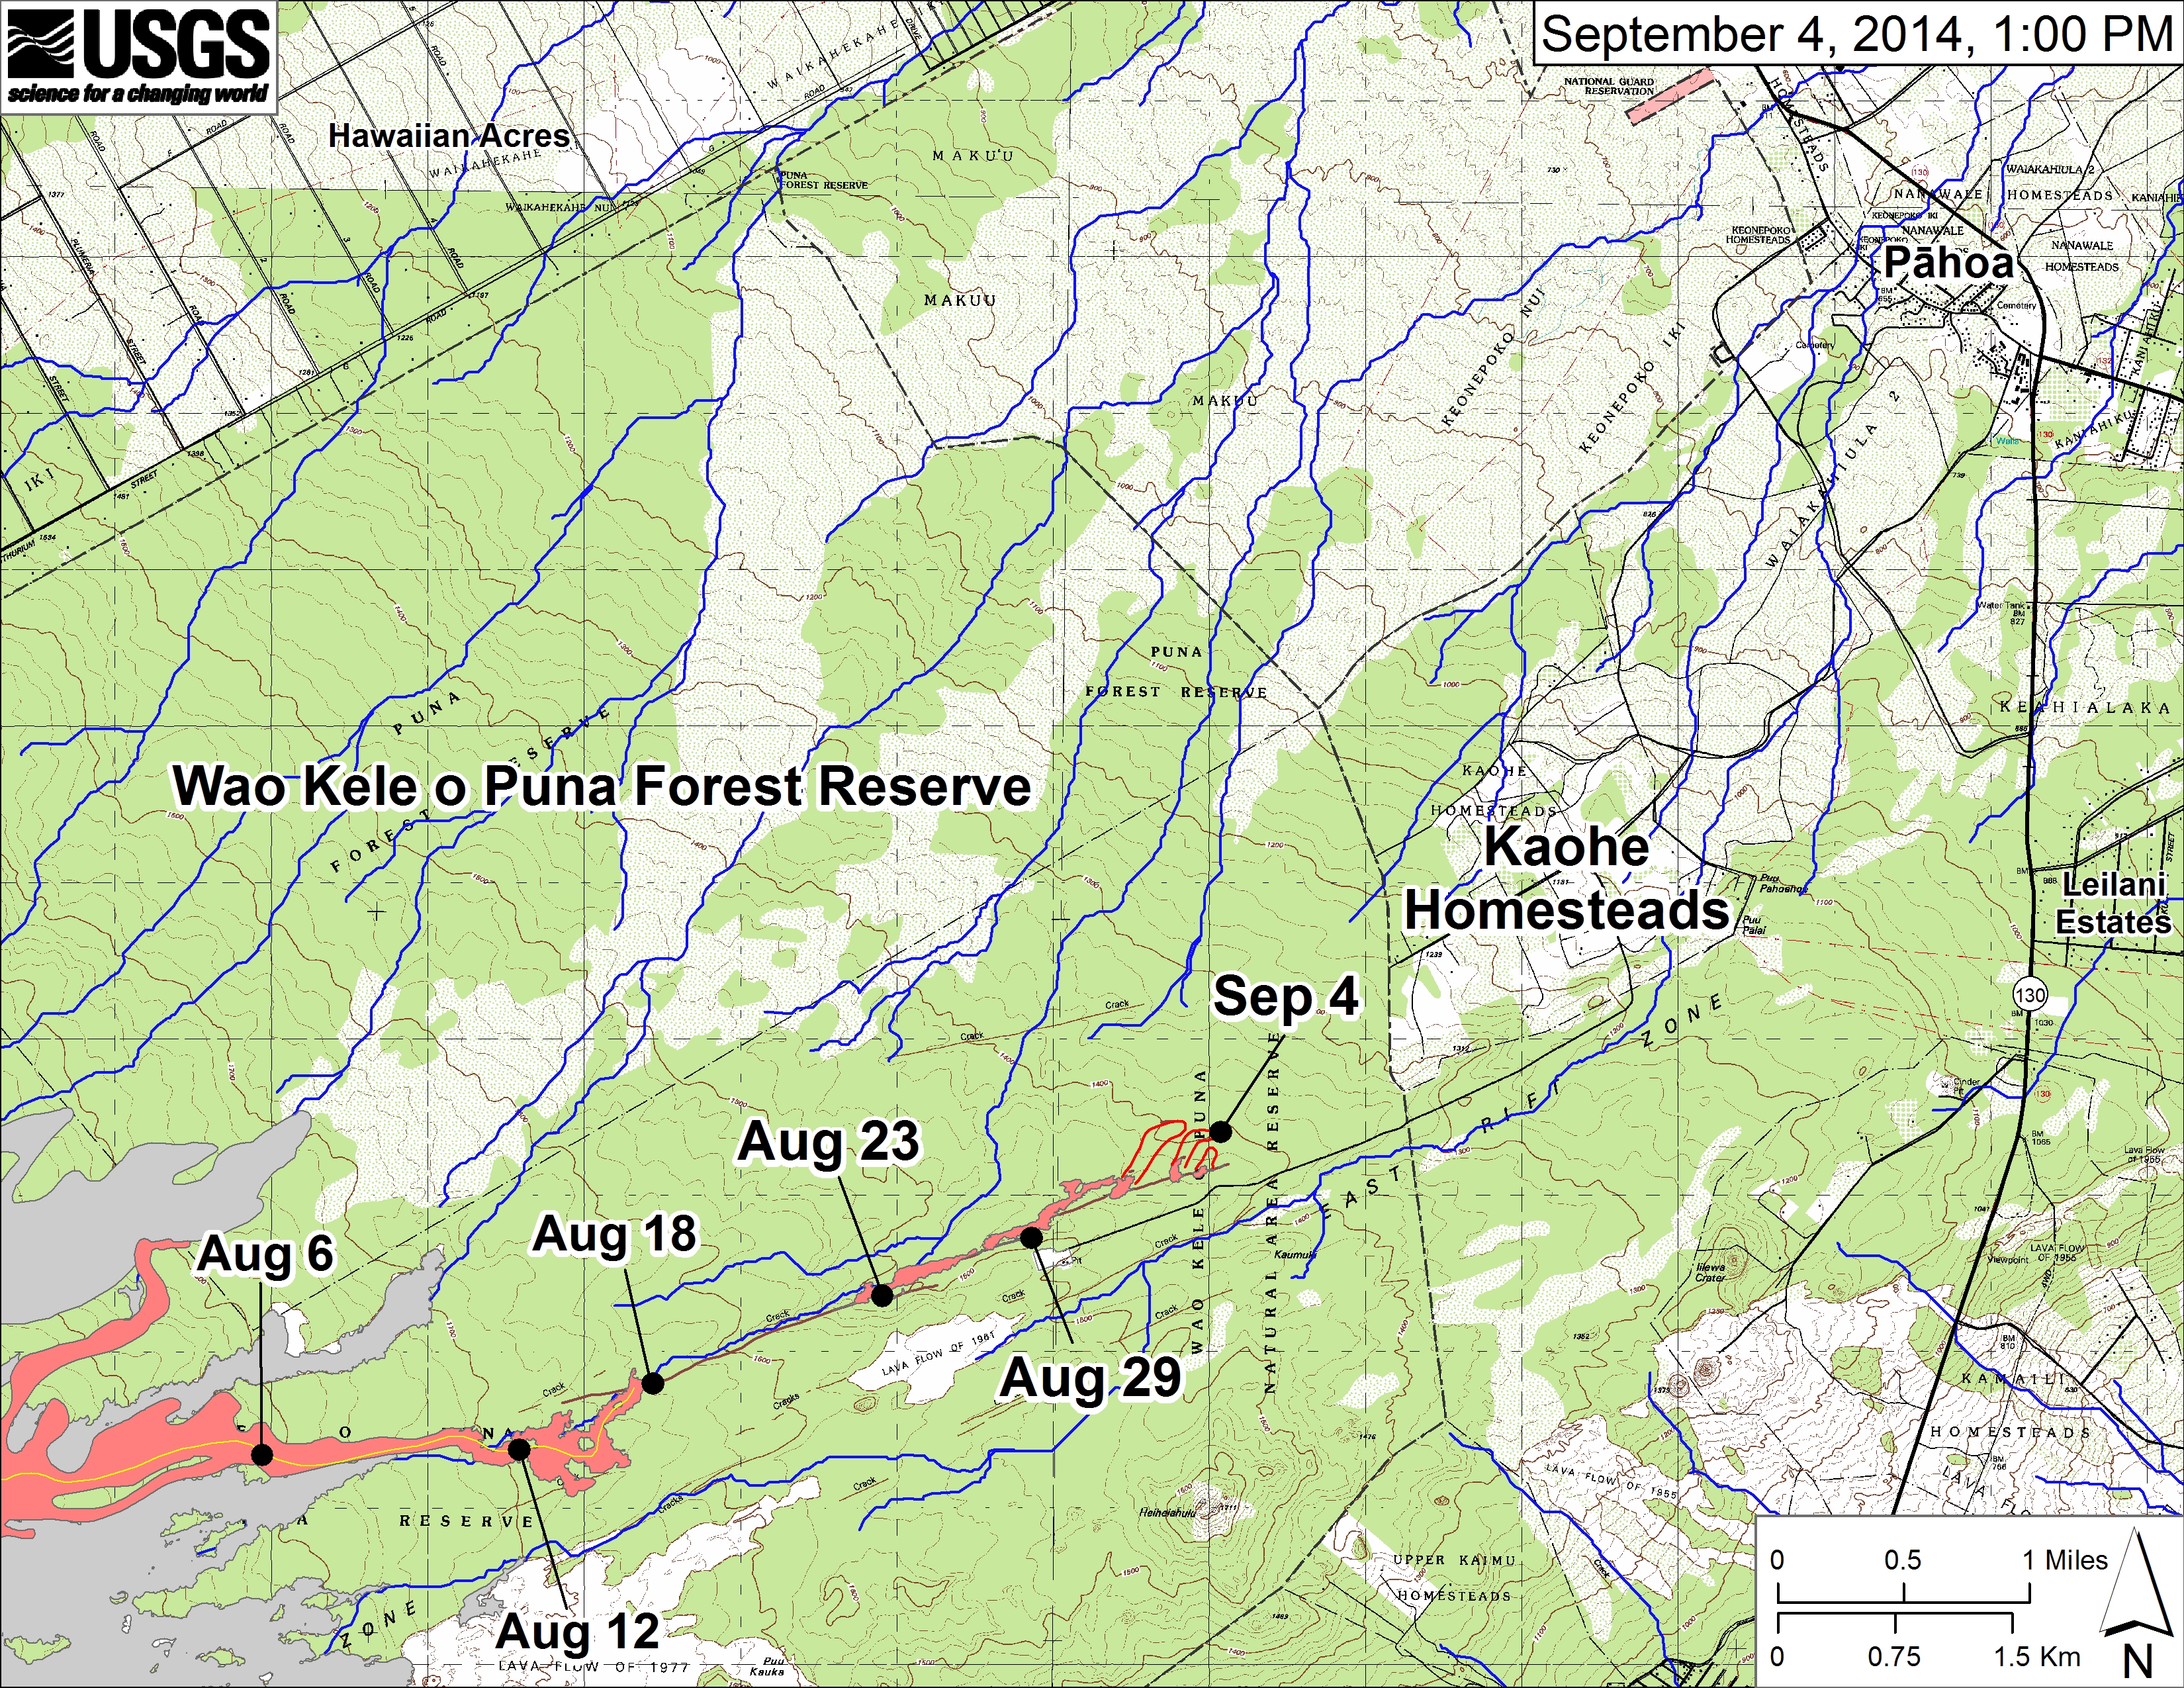 USGS HVO: Large-scale map showing the distal part of the June 27th flow in relation to nearby Puna communities. Flow advancement is illustrated with black dots which show the flow front on specific dates. The most distant surface lava at 1 PM on September 4, outlined in red, was 13.3 km (8.3 miles) from the vent and 1.2 km (0.7 miles) from the east boundary of the Wao Kele o Puna Forest Reserve. September 4 point Lat/Lon position: 19.446211/-154.990149 Decimal Degrees; WGS84. The blue lines show potential flow paths calculated from a 1983 digital elevation model (DEM; for calculation details, see http://pubs.usgs.gov/of/2007/1264/of2007-1264.pdf).